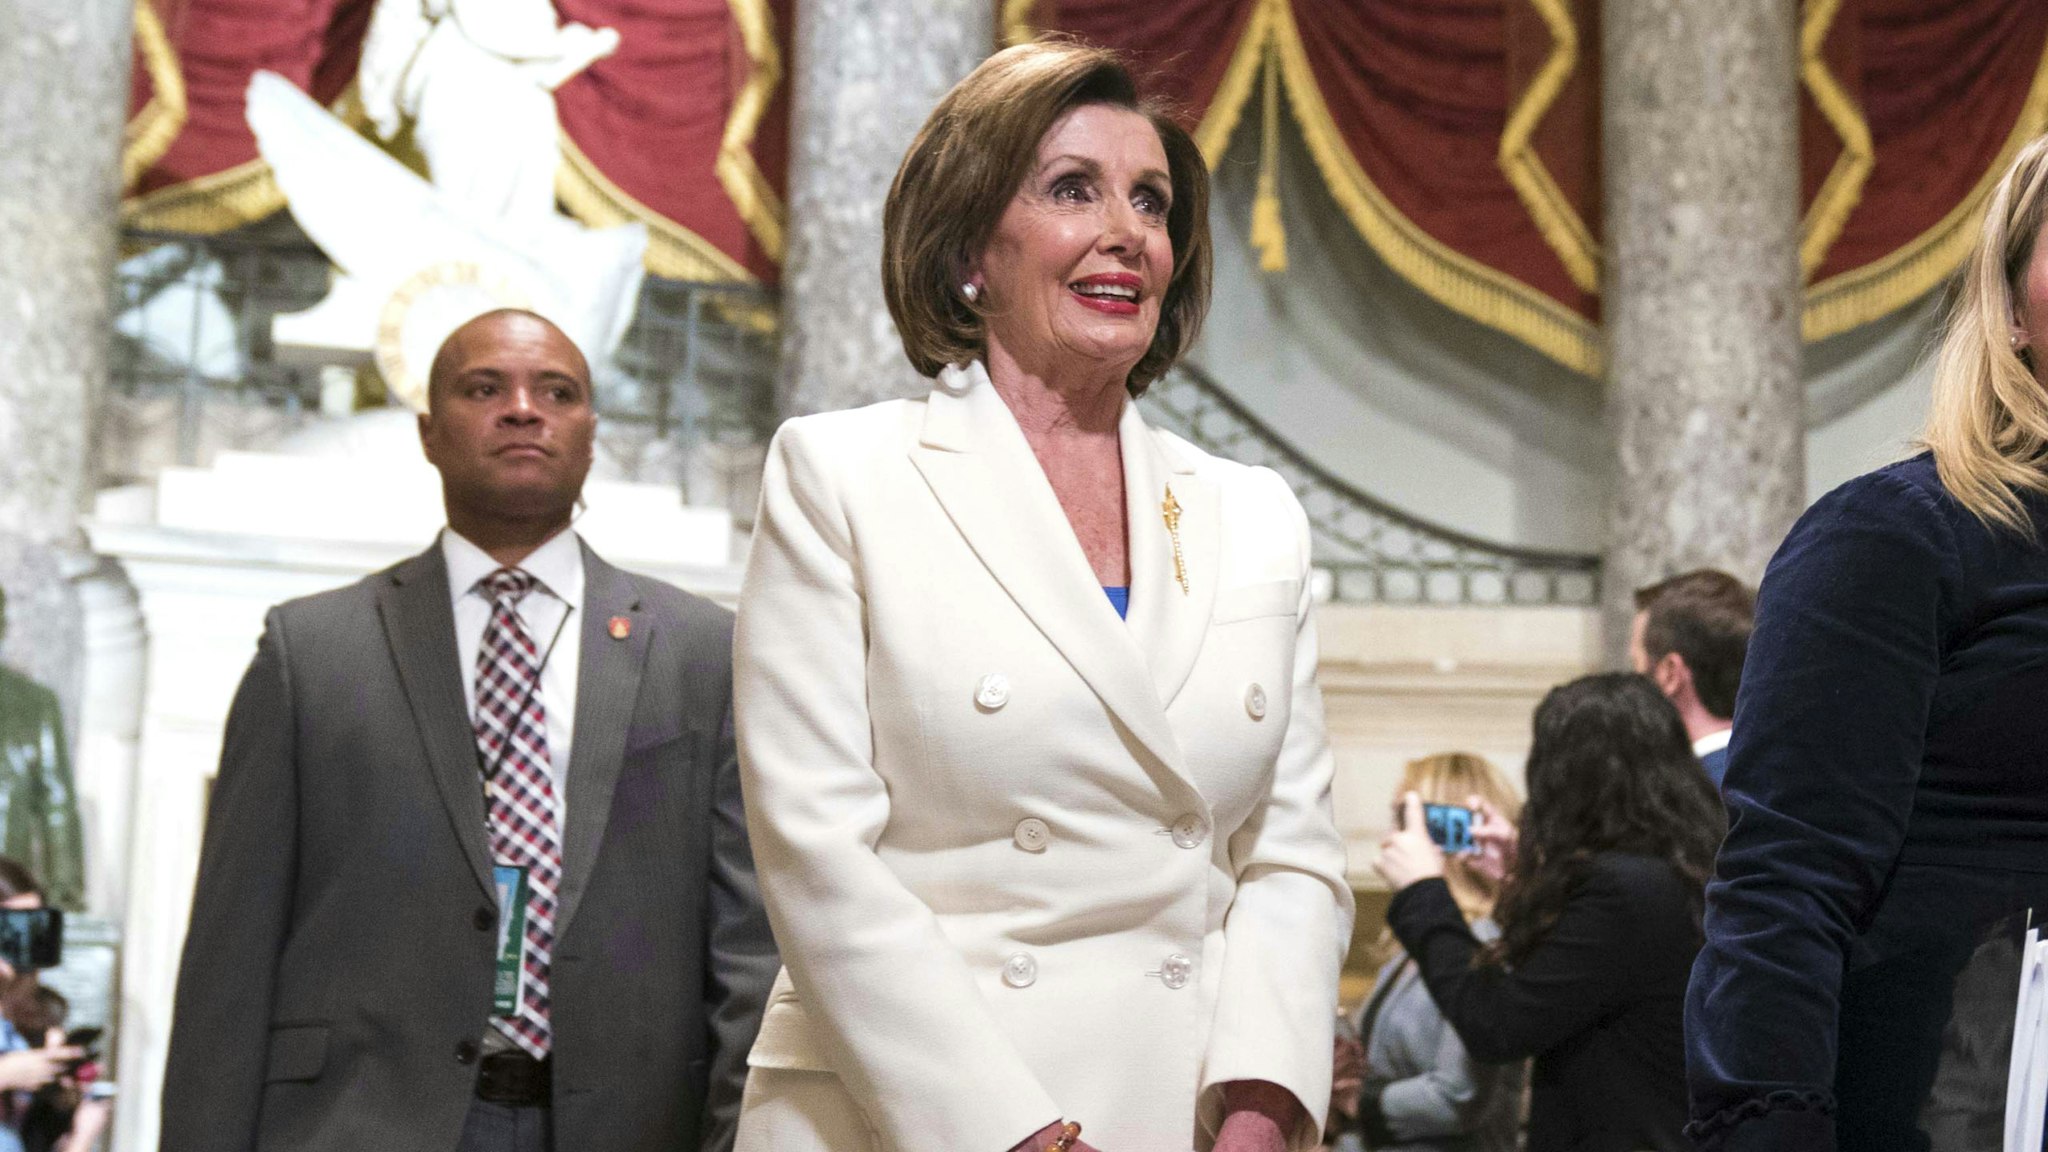 WASHINGTON, DC - FEBRUARY 04: House Speaker Rep. Nancy Pelosi (D-CA) walks through Statuary Hall to the House Chamber for the State of the Union on February 4, 2020 in Washington, DC. President Trump delivers his third State of the Union to the nation the night before the U.S. Senate is set to vote in his impeachment trial.